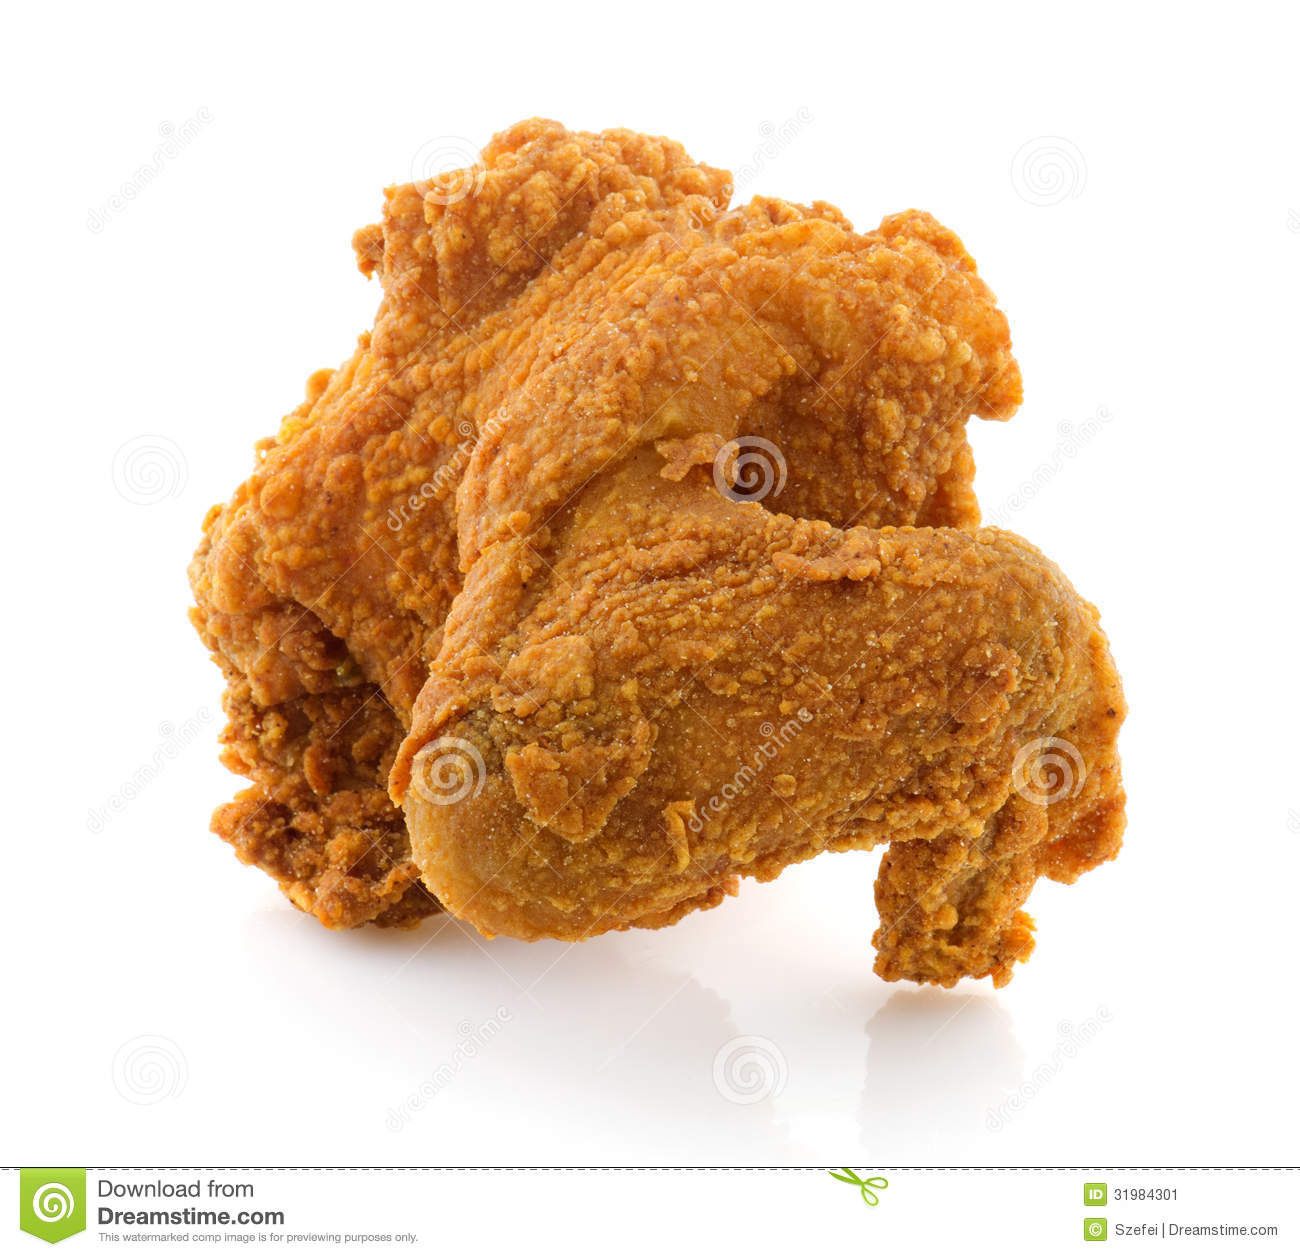 Fried Chicken Wing Stock Image   Image  31984301